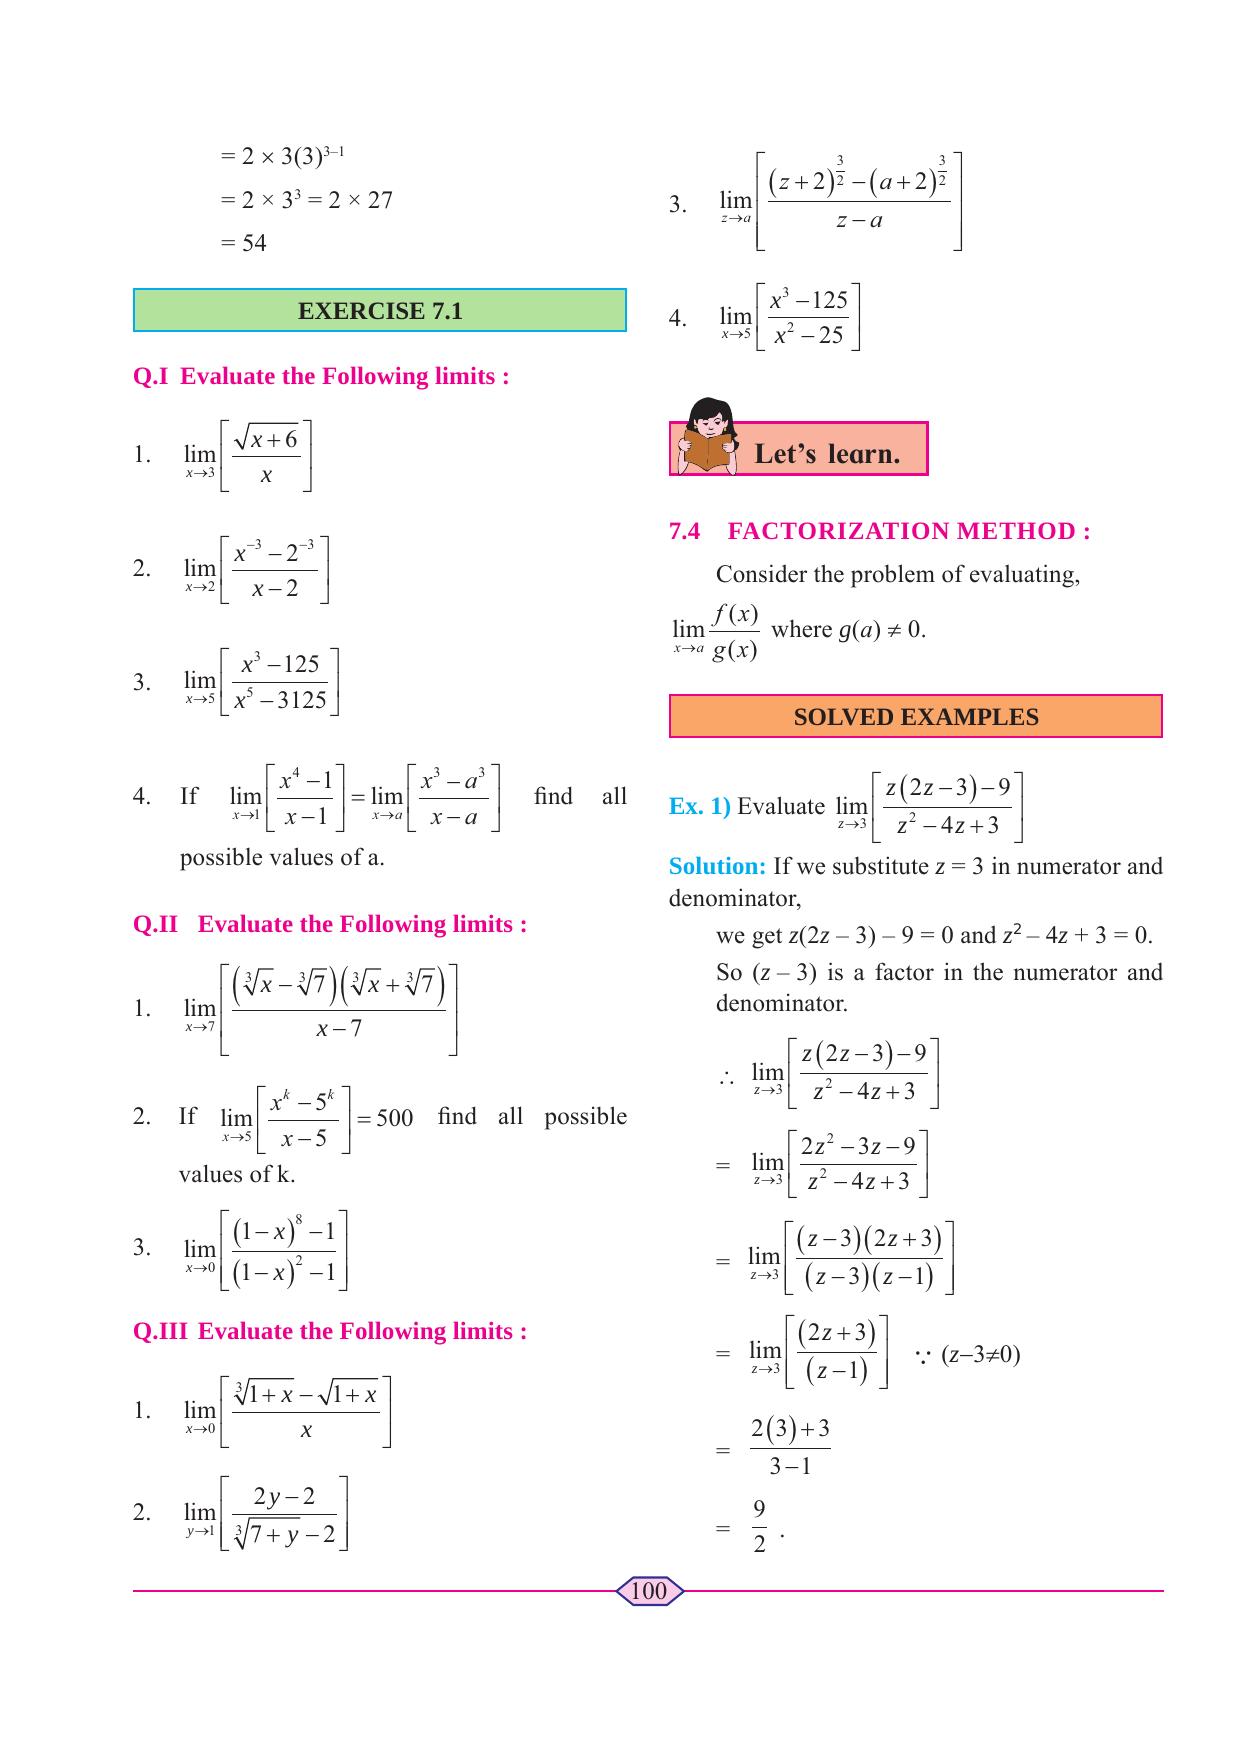 Maharashtra Board Class 11 Maths (Commerce) (Part 1) Textbook - Page 110